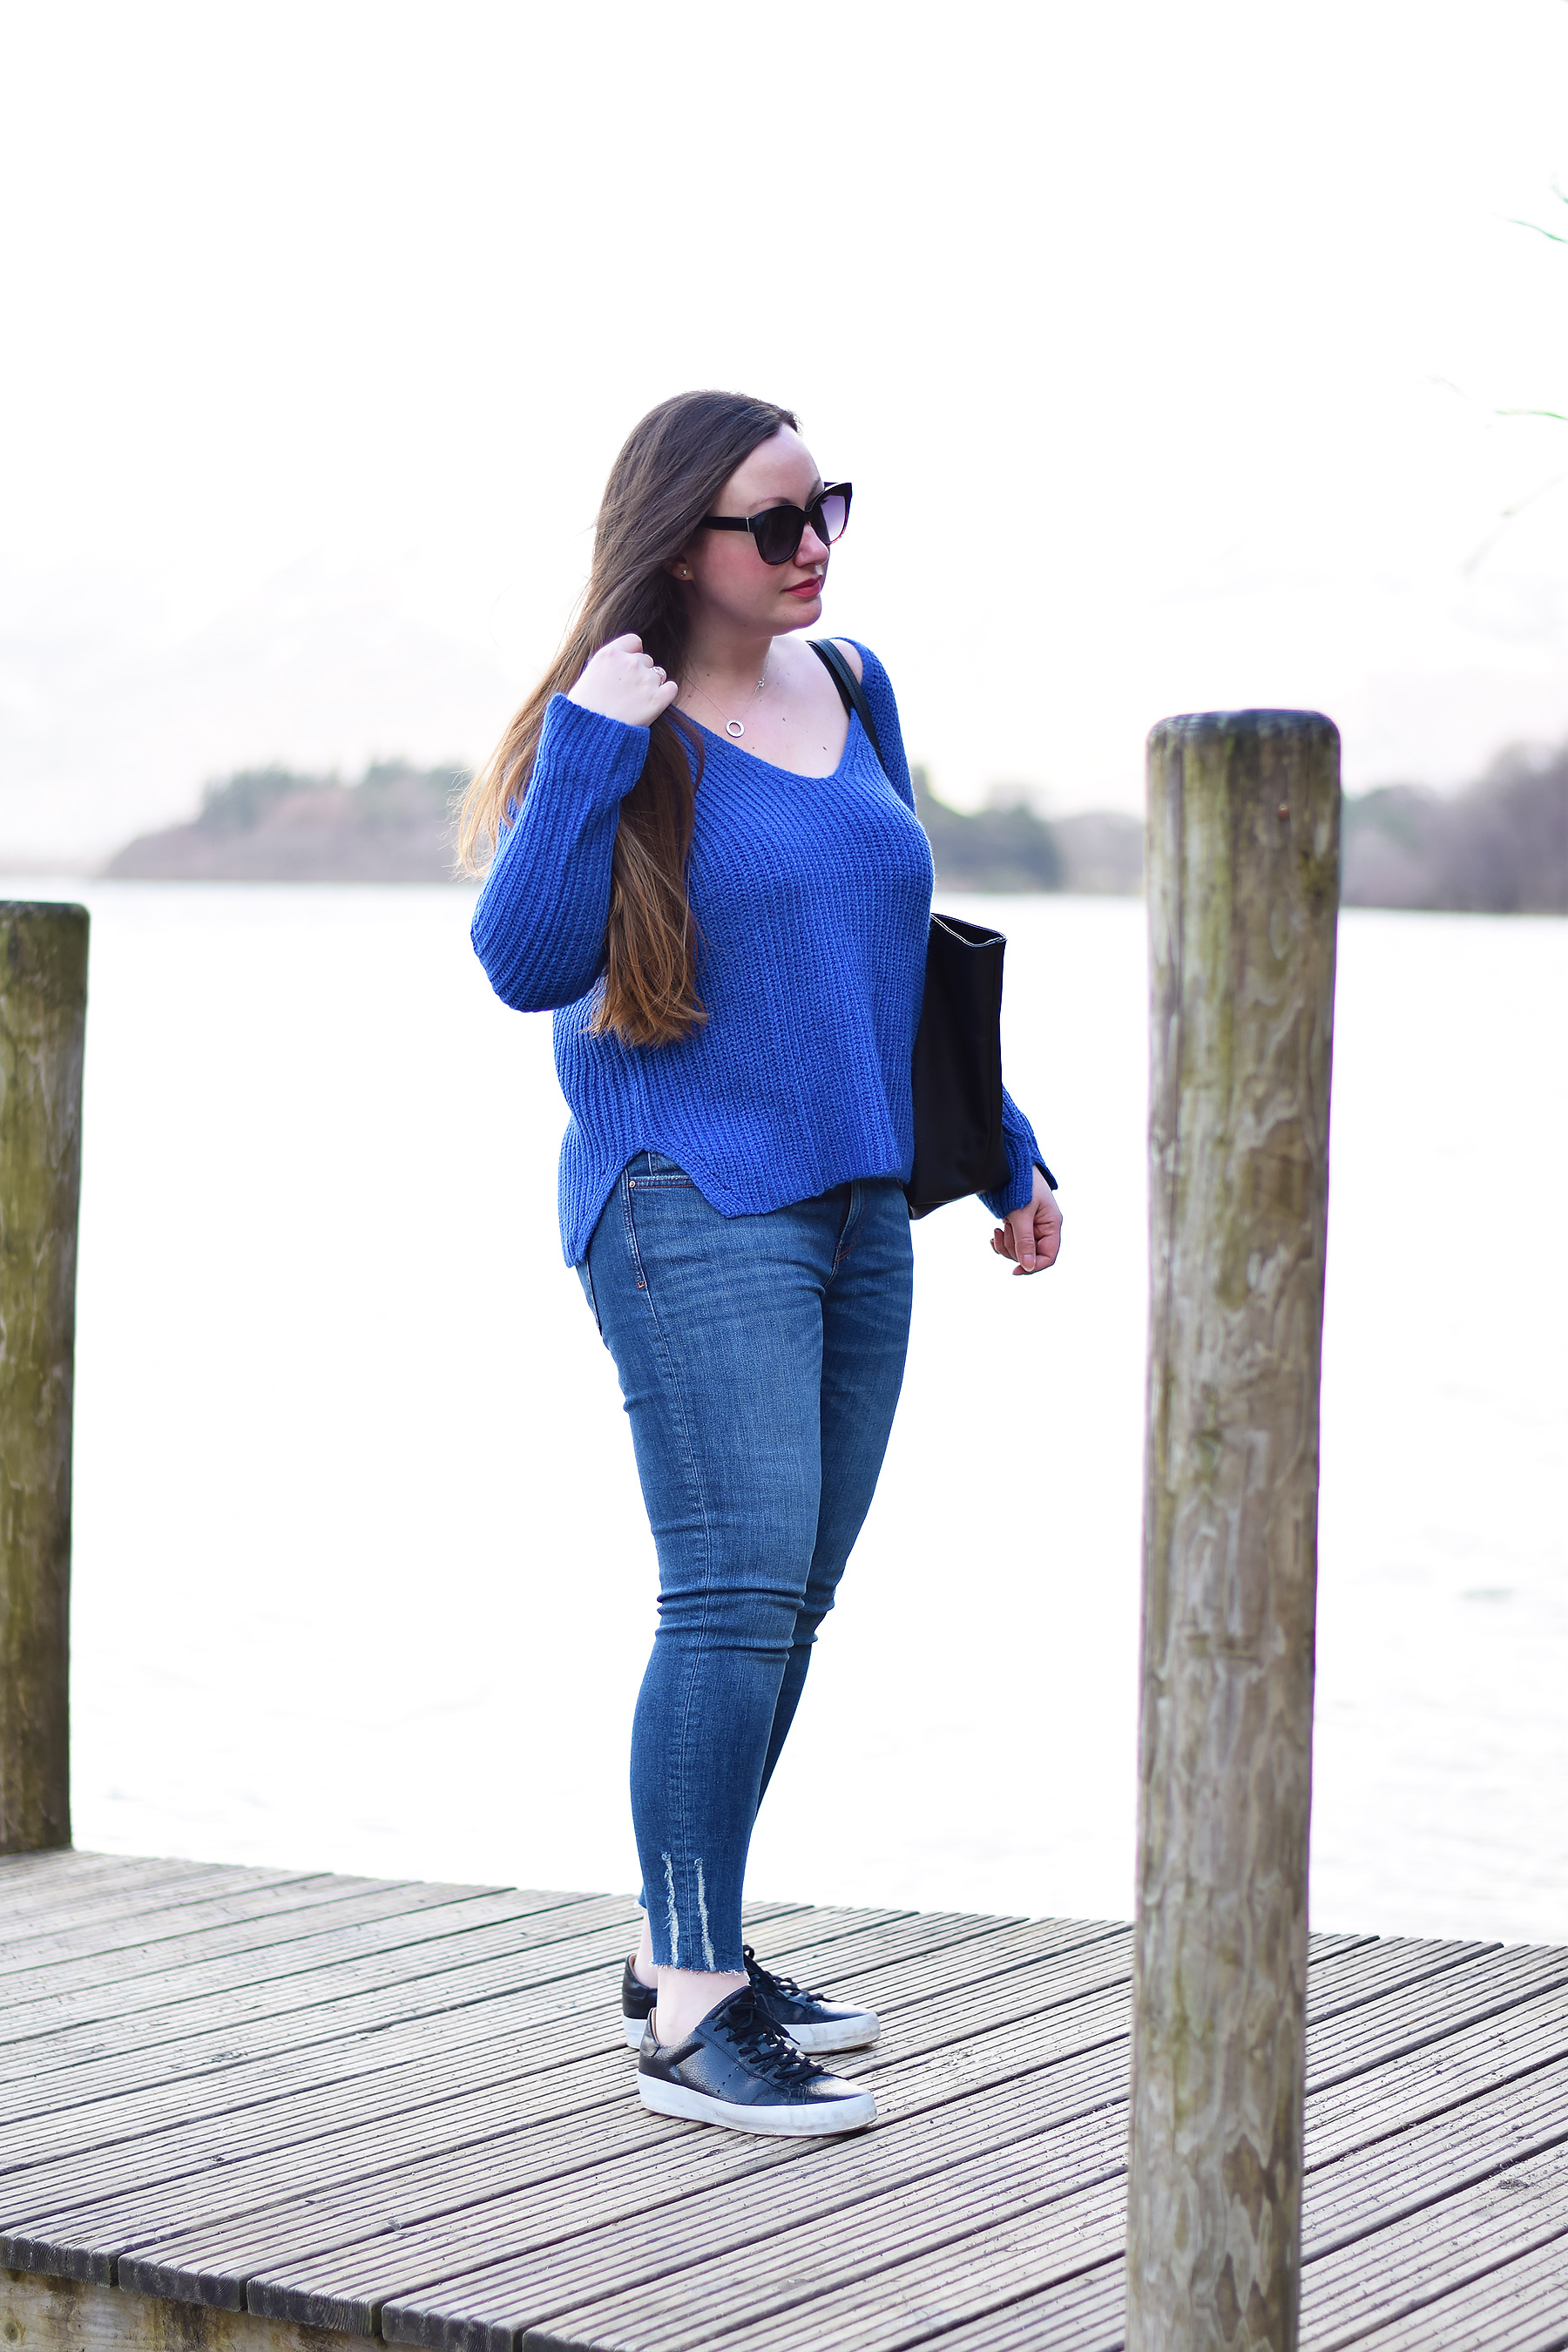 Bright blue jumper outfit with jeans and trainers